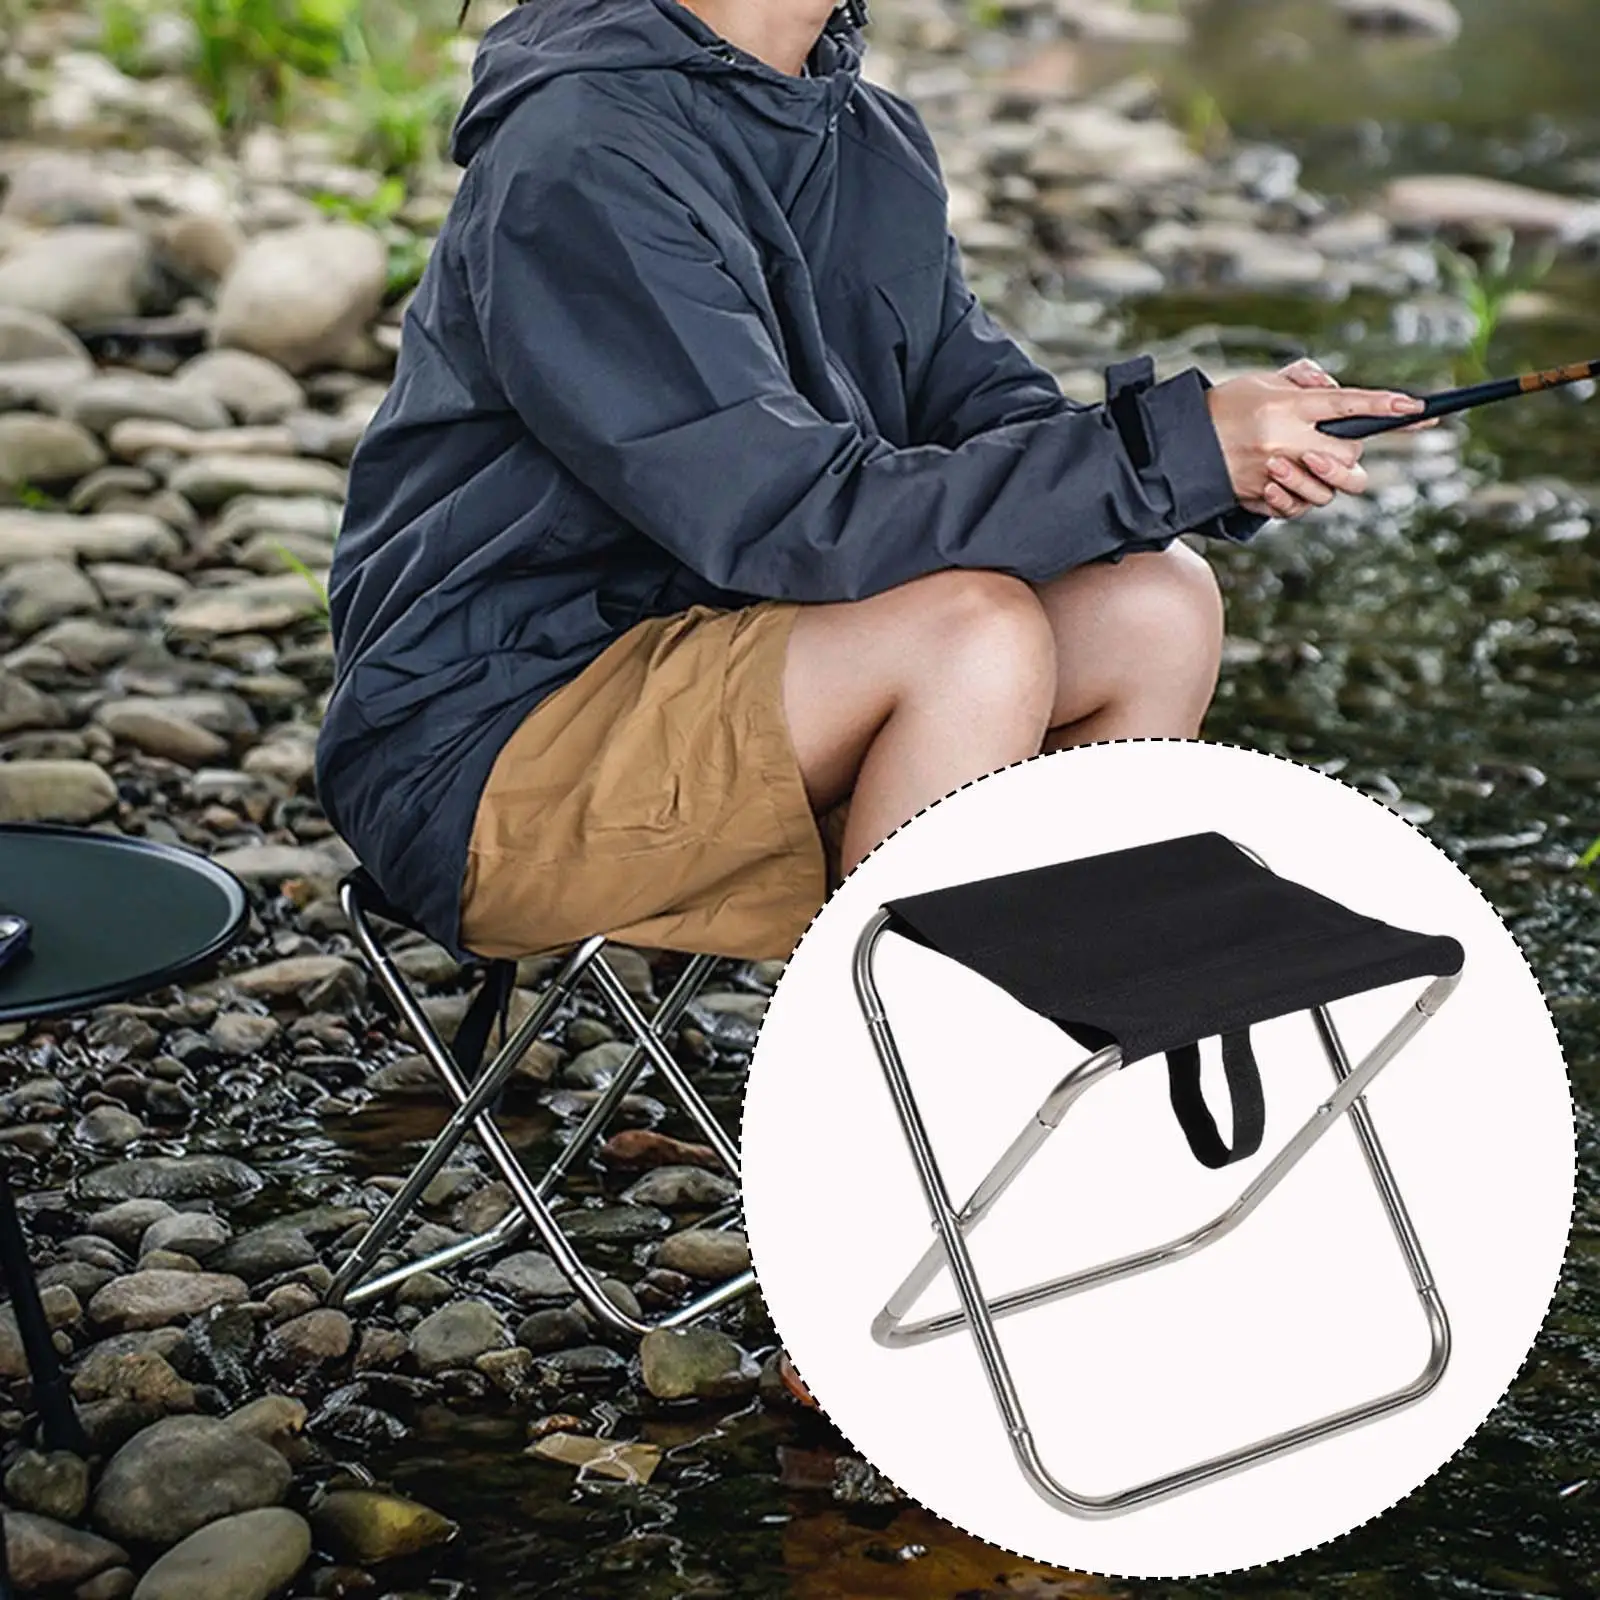 Camping Stool Folding Adults Fishing Seat Outdoor Picnic Chair Mini Portable for Backyard Concert Barbecue Party Fishing 